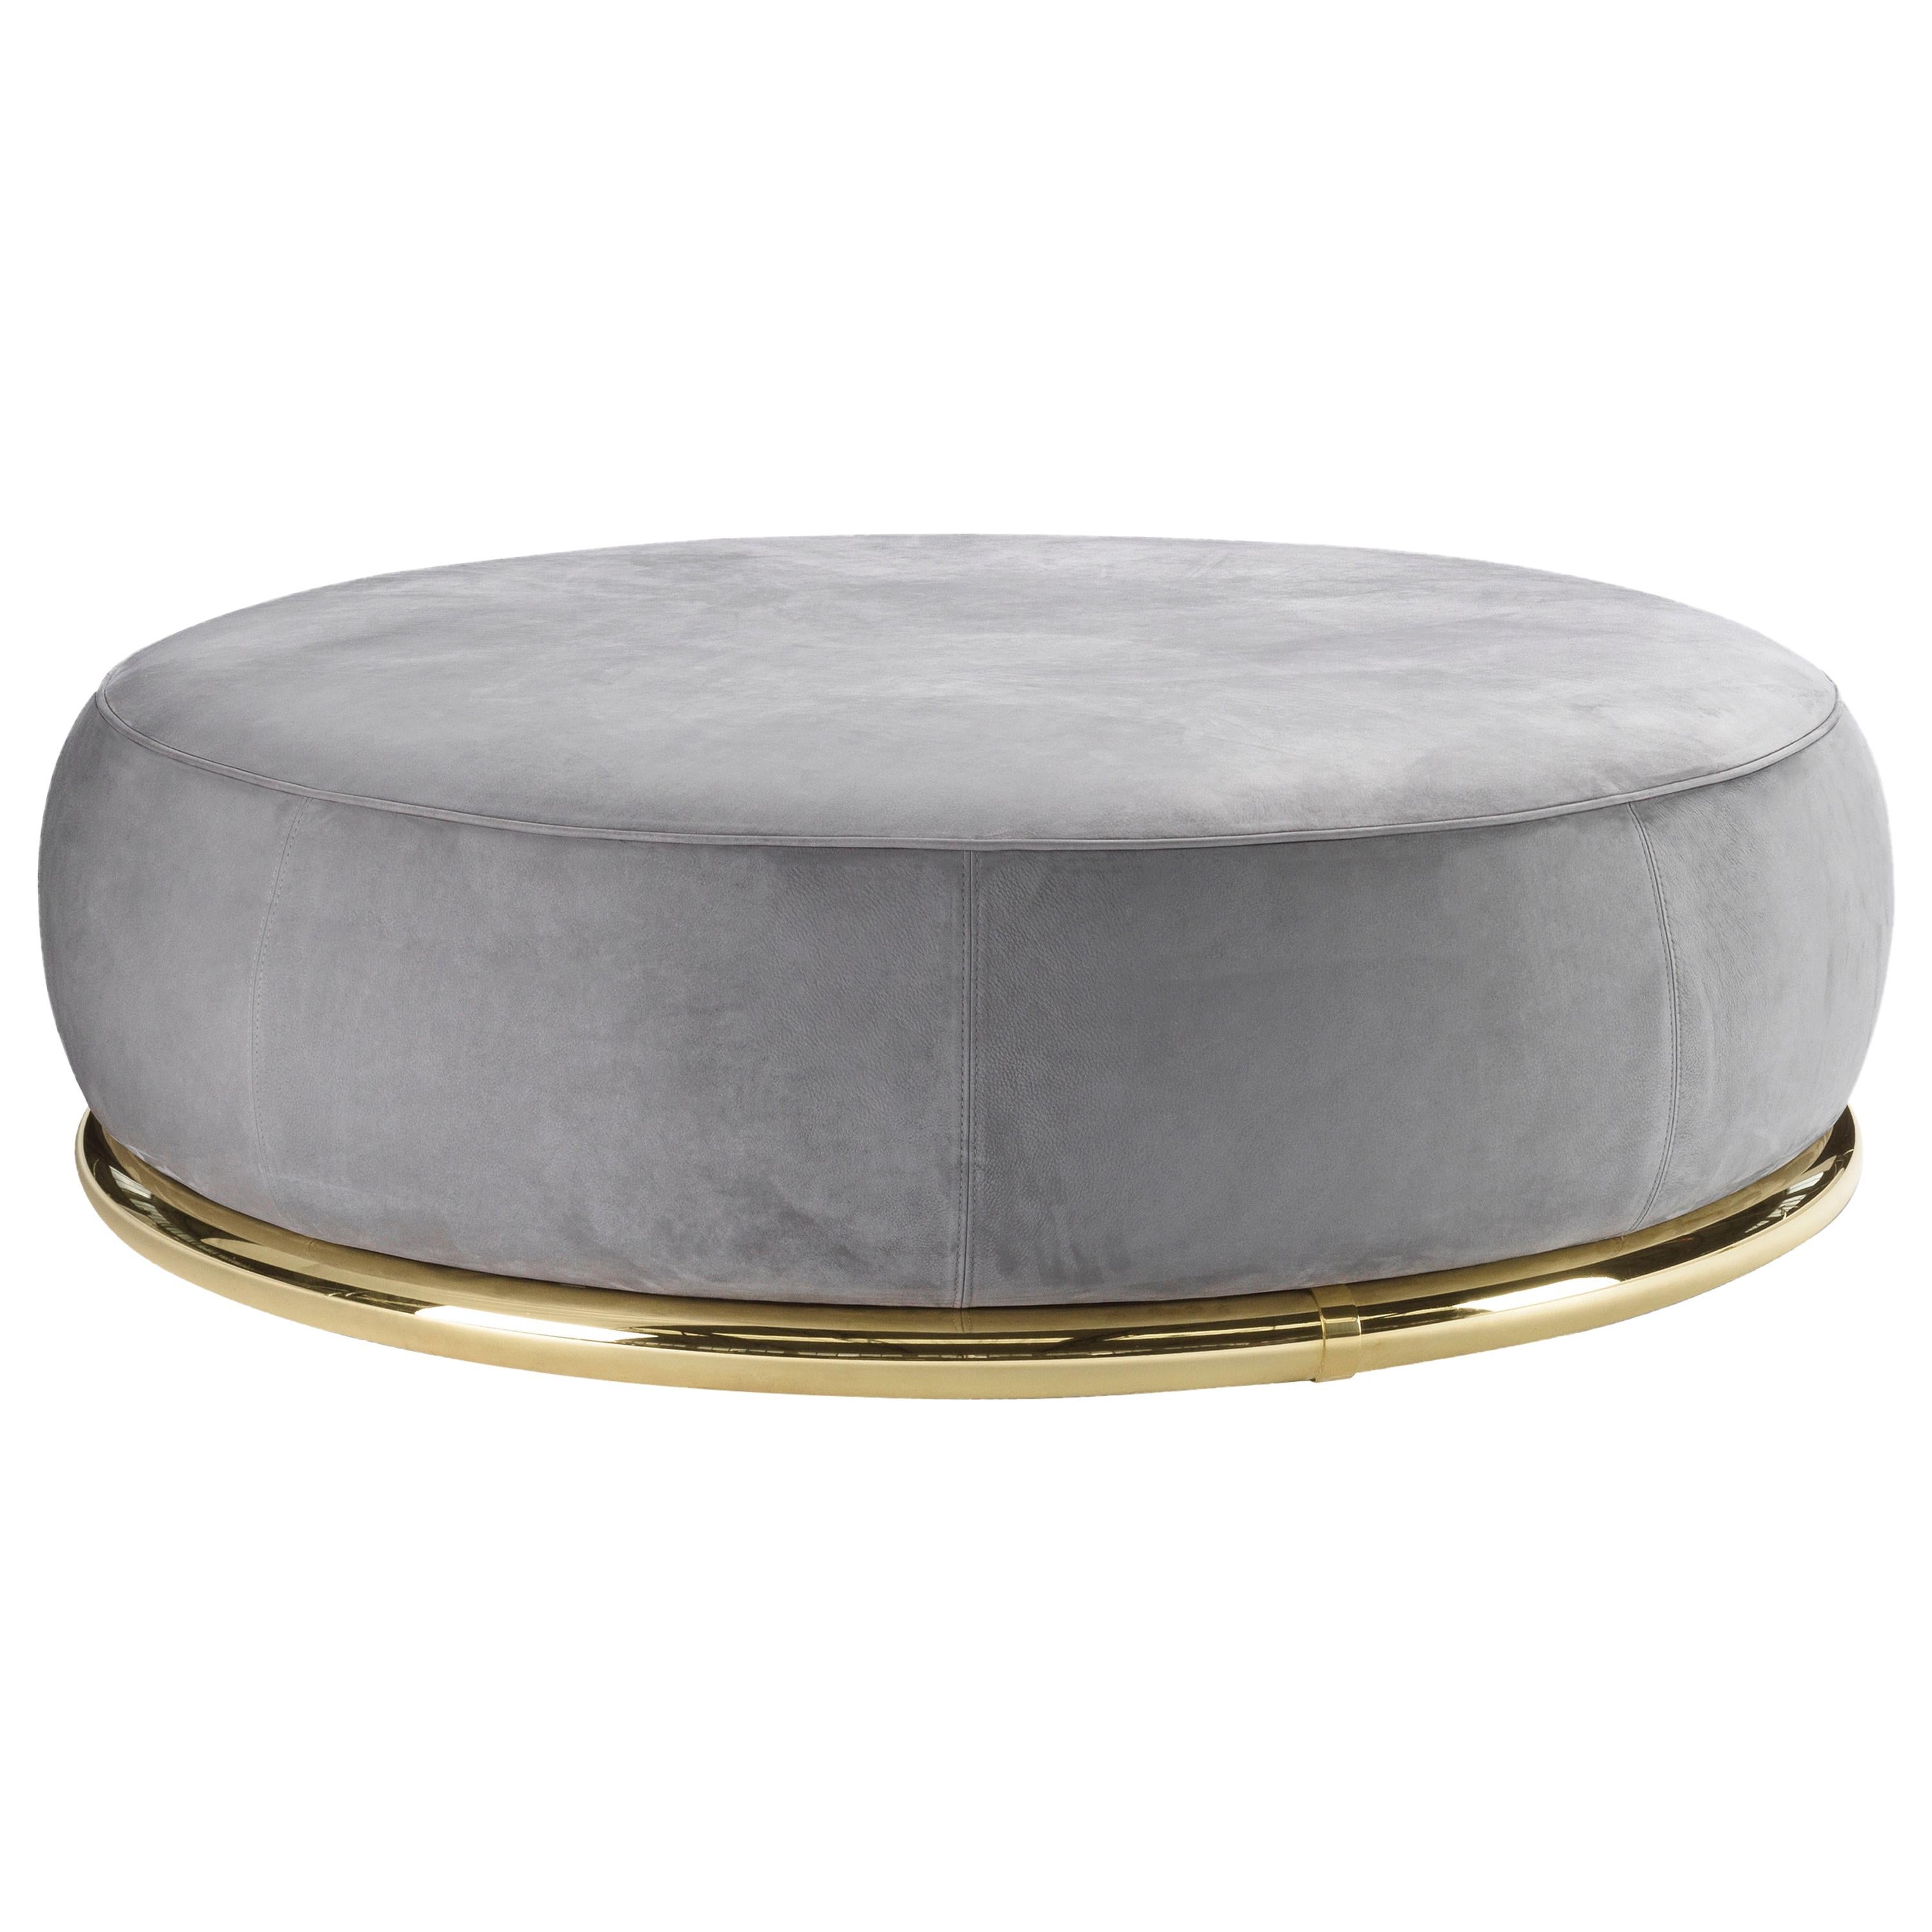 Ghidini 1961 Abbracci Large Ottoman in Grey Leather and Brass Base by L. Bozzoli For Sale